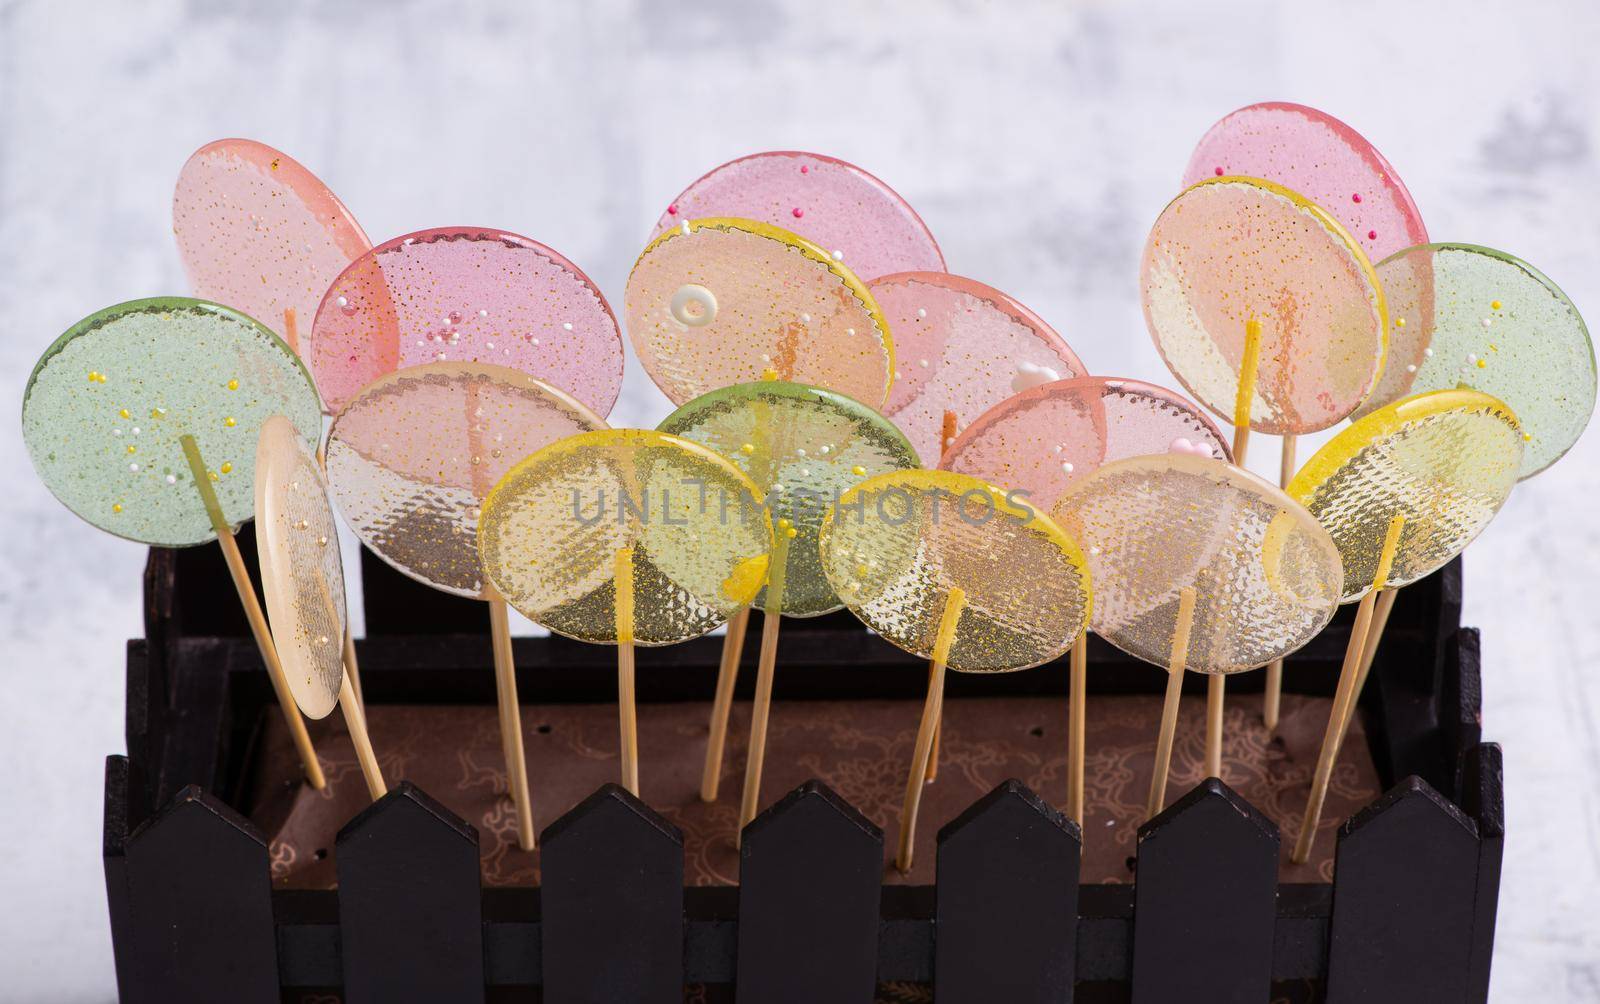 A close-up shot of a whole brownie decorated with glass lollypops.